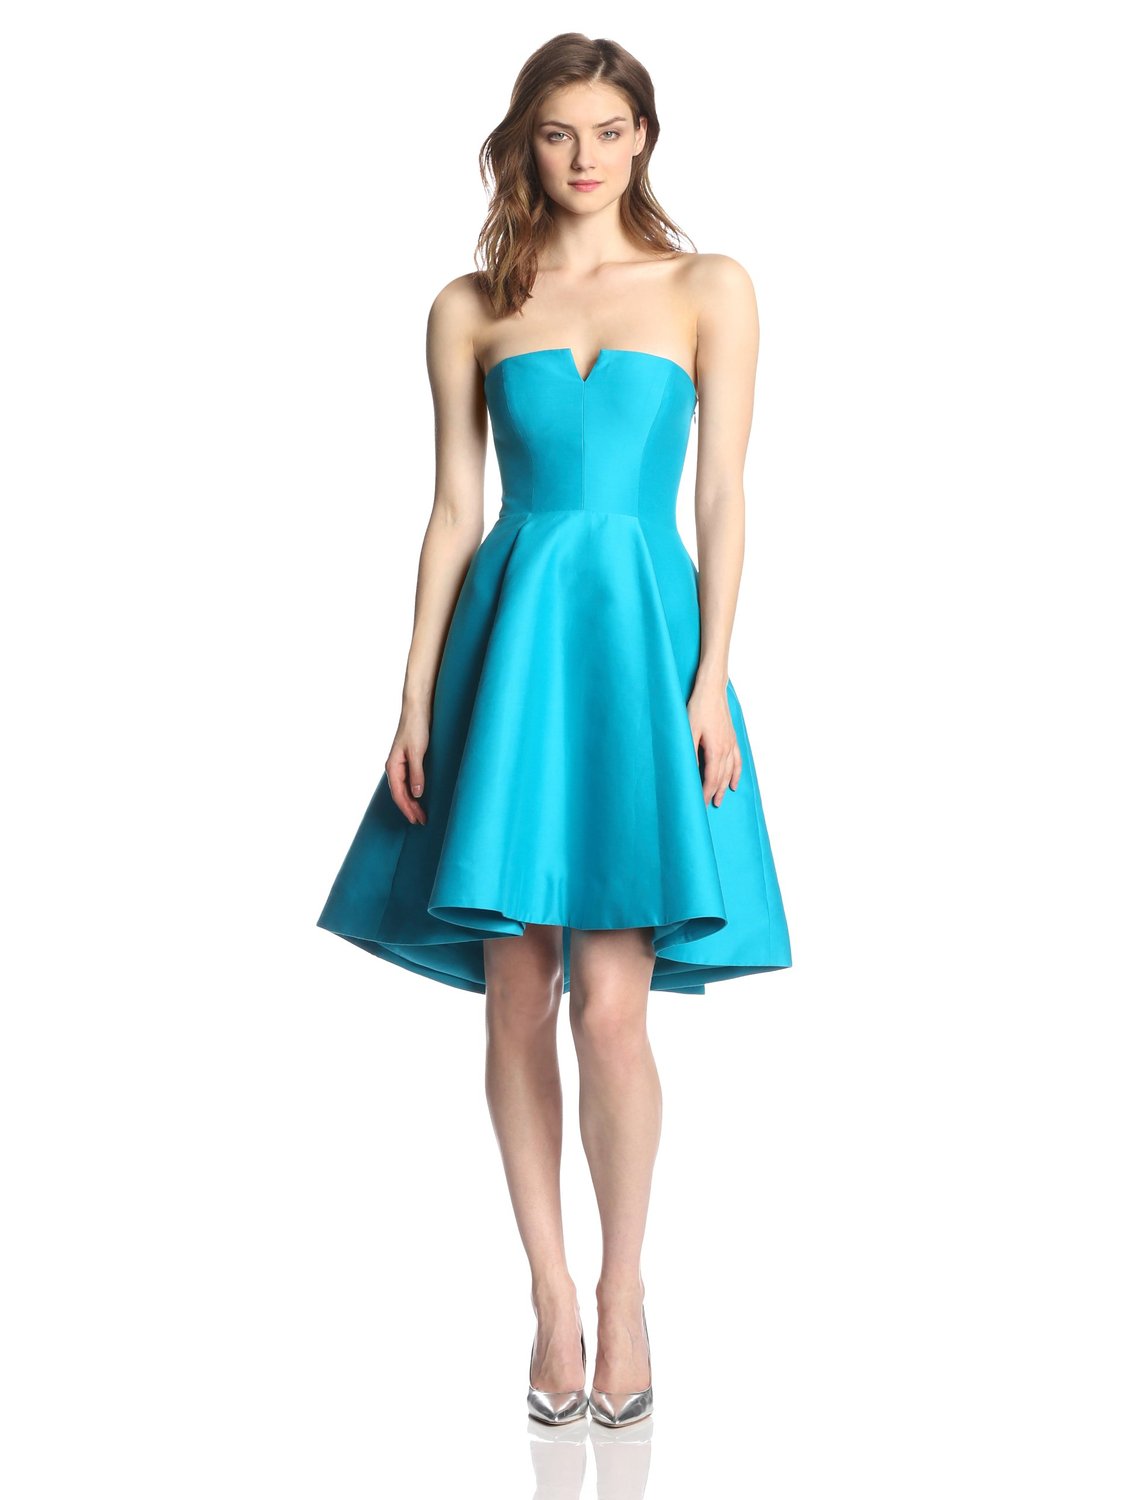 Caribbean blue HALSTON HERITAGE Womens Strapless Structured Dress with Flare